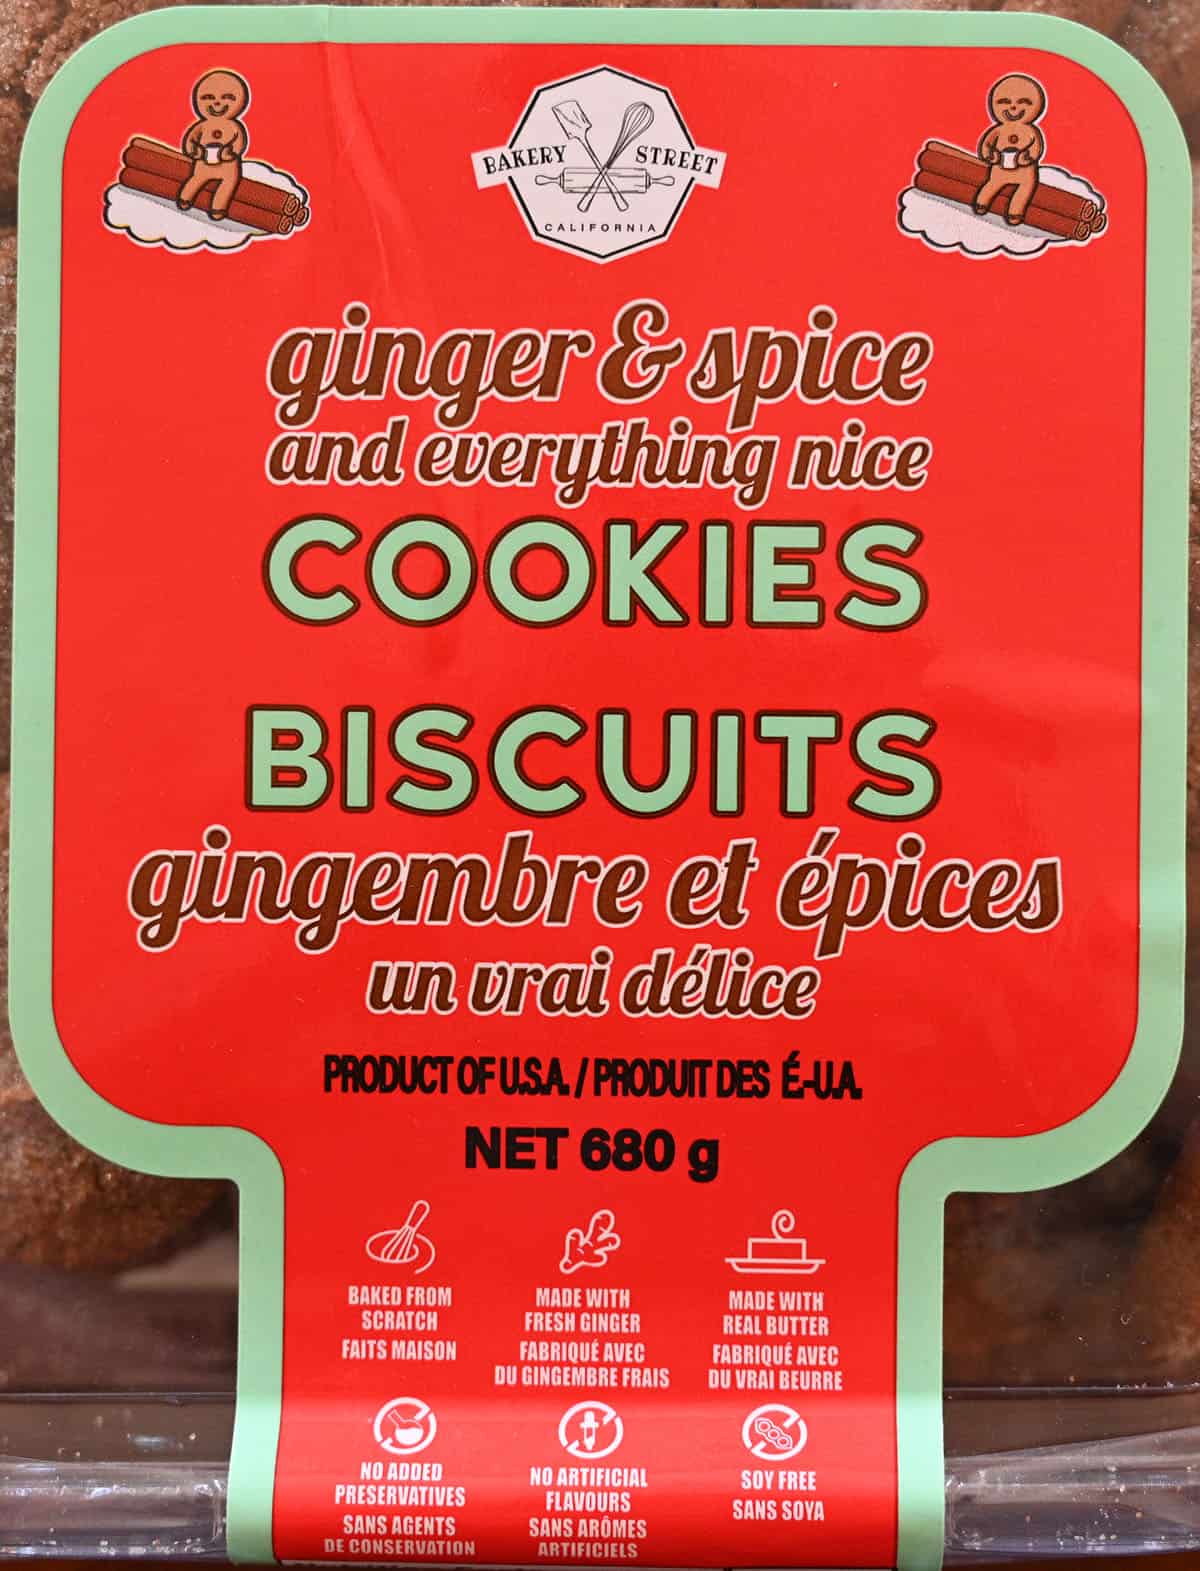 Closeup image of the front label on the cookie container showing the cookies are product of USA and baked from scratch.